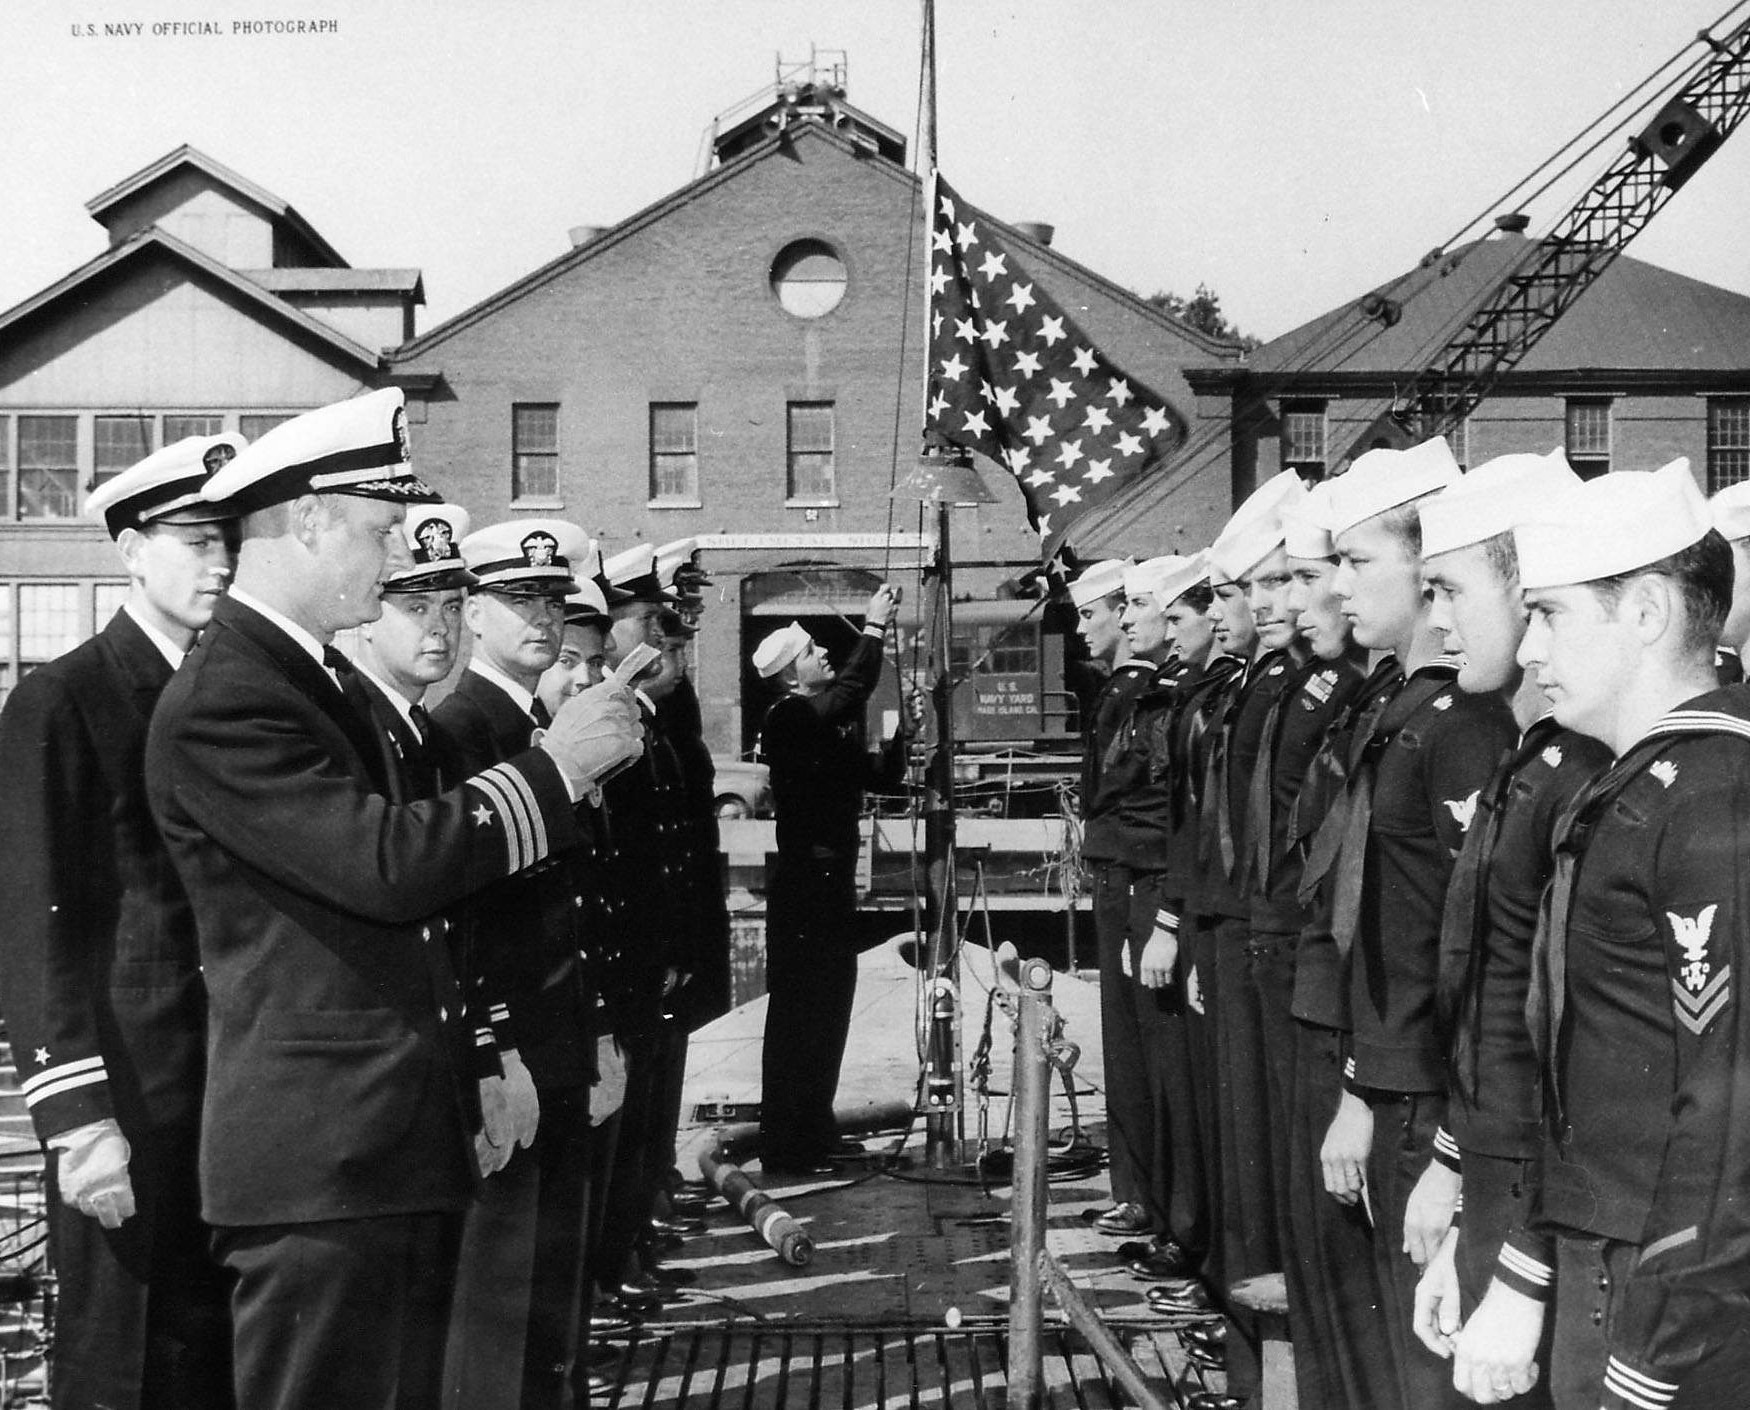 Commander Samuel Bussey at the commissioning ceremony of USS Barbero, Mare Island Naval Shipyard, Vallejo, California, United States, 26 Jul 1948